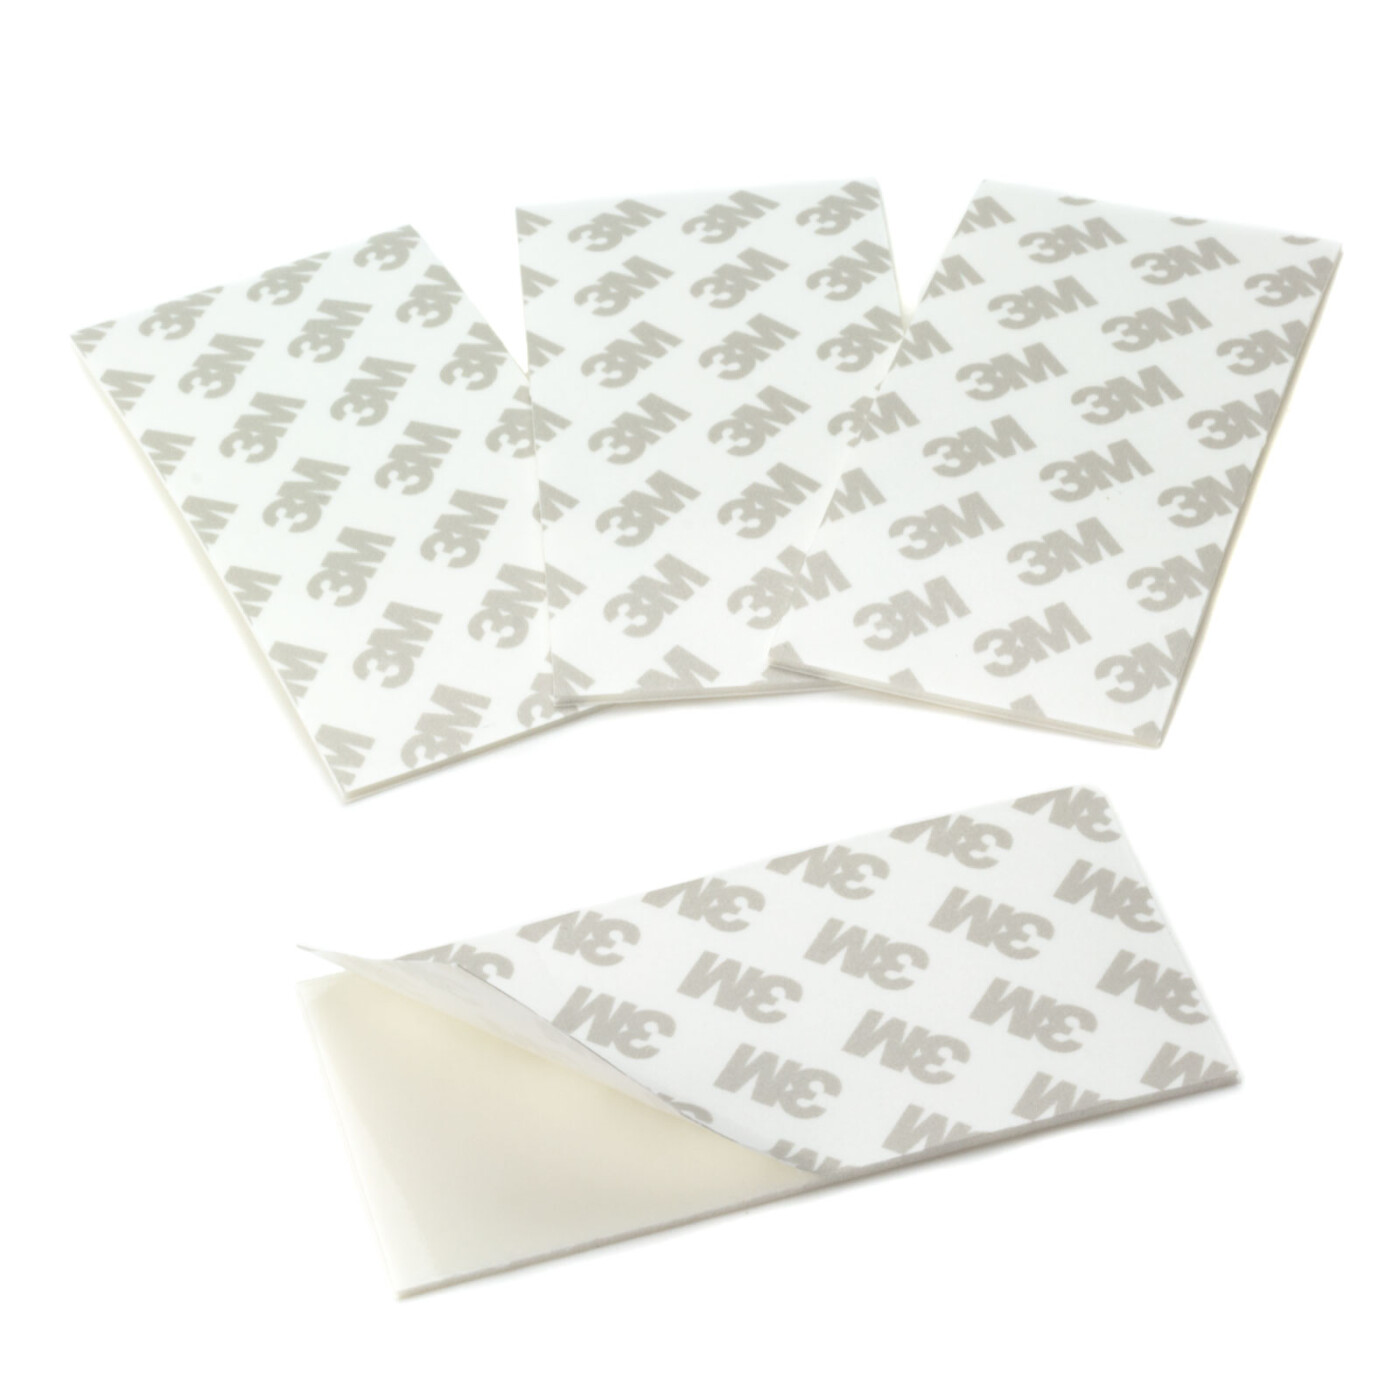 Buy 3M double sided adhesive pads online